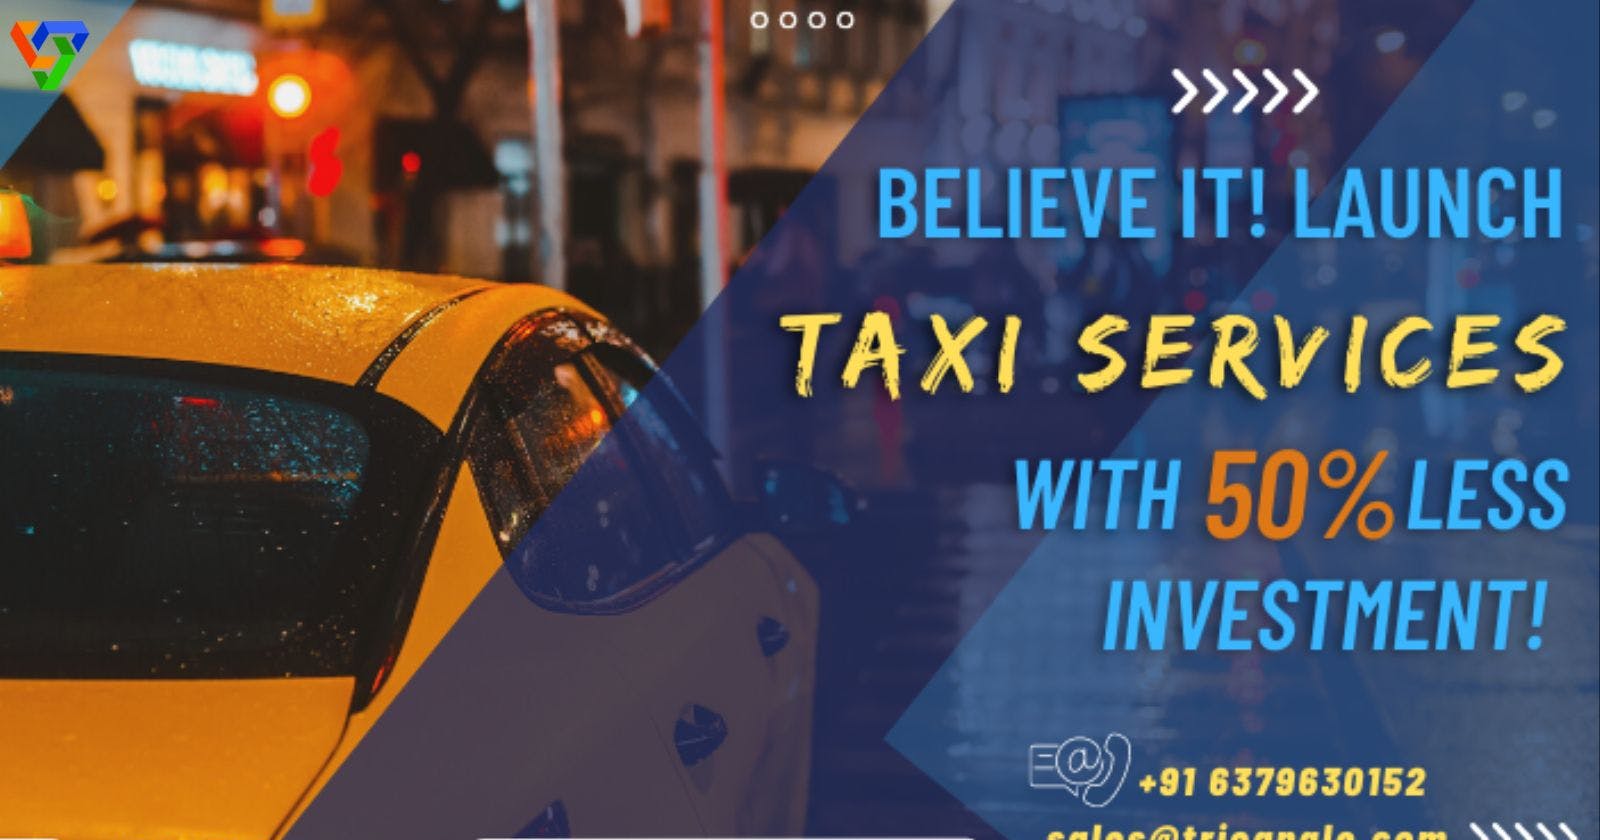 Believe It! Launch Taxi Services With 50% Less Investment!